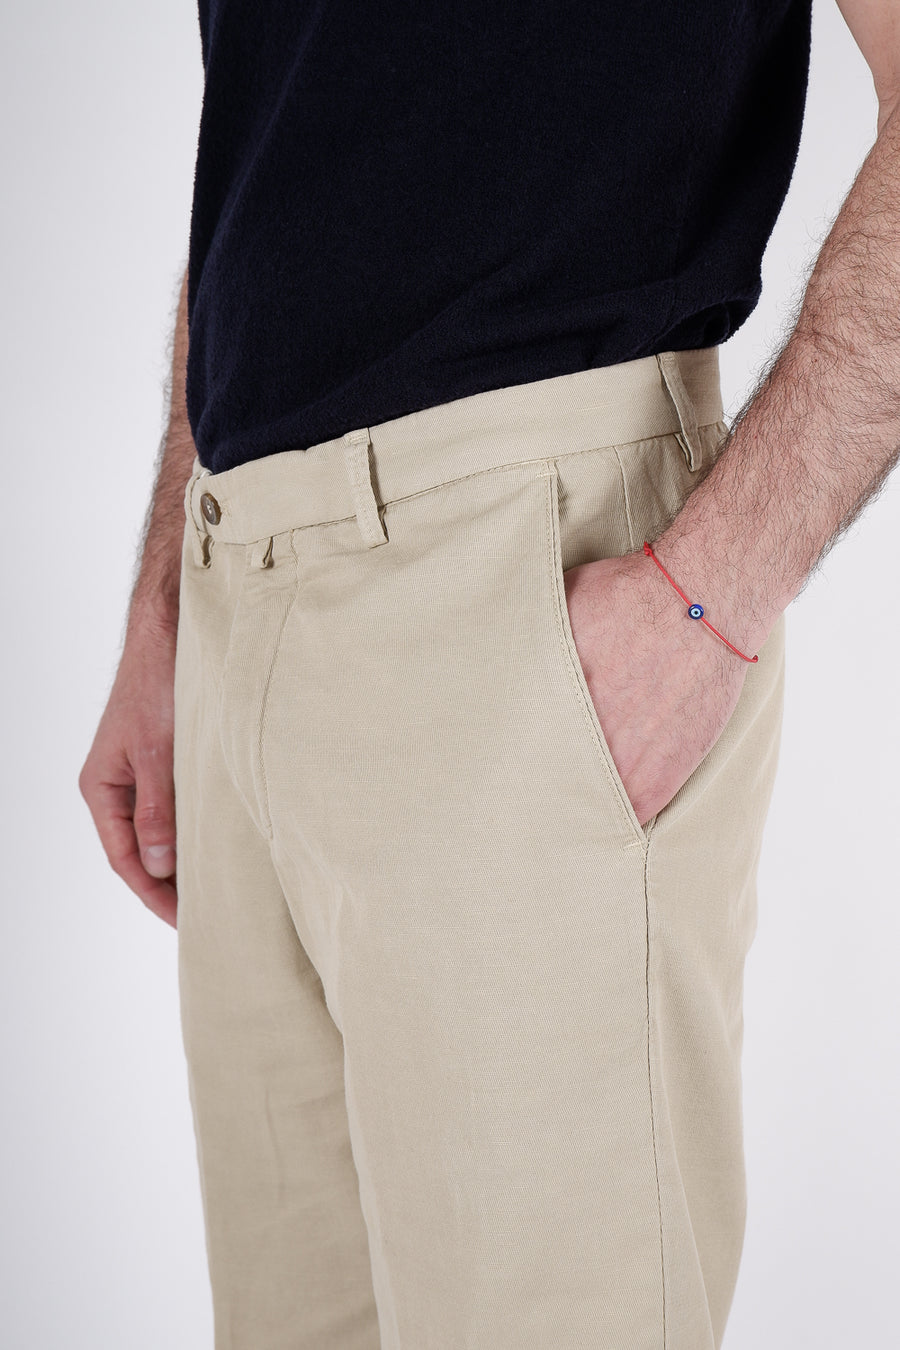 Buy the Briglia Italian Cotton Chino Shorts in Beige at Intro. Spend £100 for free UK delivery. Official stockists. We ship worldwide.